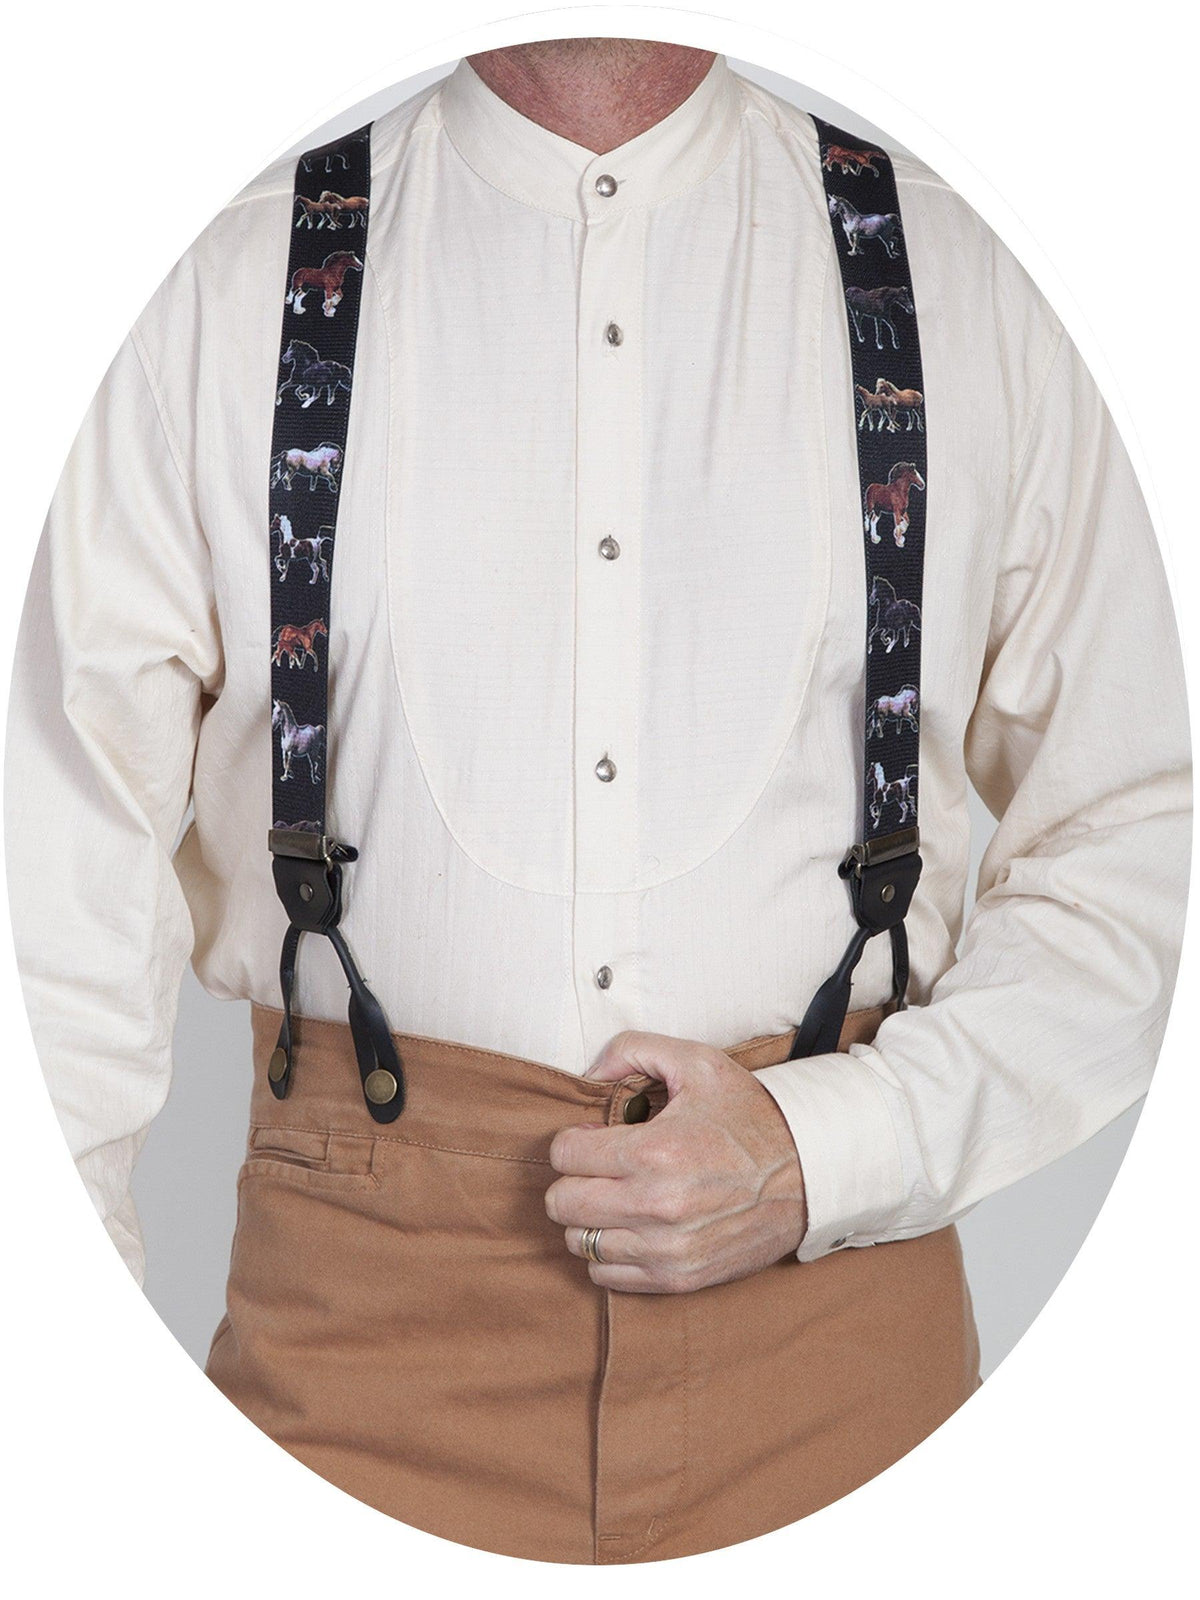 Scully Our elastic suspender with a fun horse print - Flyclothing LLC